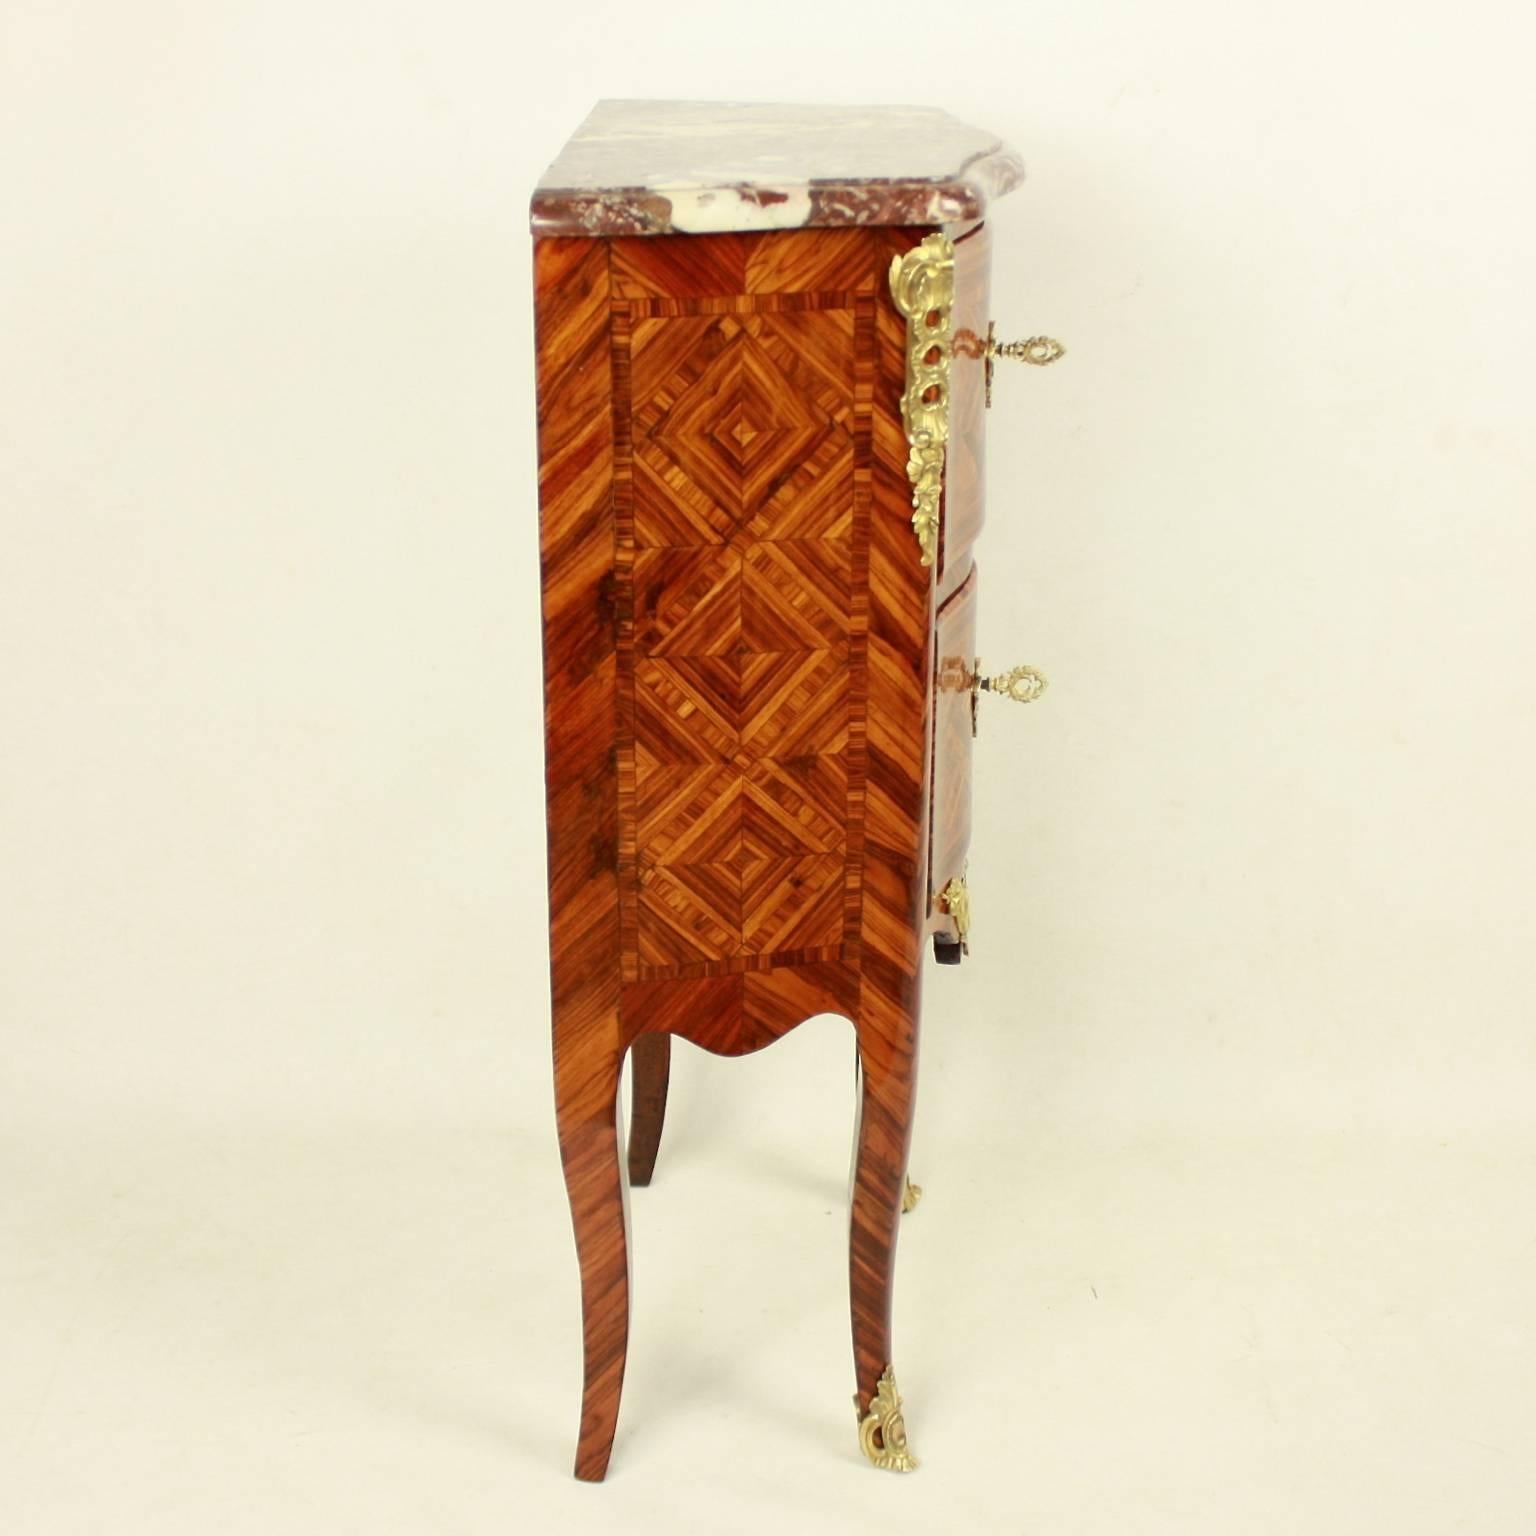 Early 18th Century Small Tulipwood and Parquetry Commode, Late Regence, in the Manner of M. Criaerd